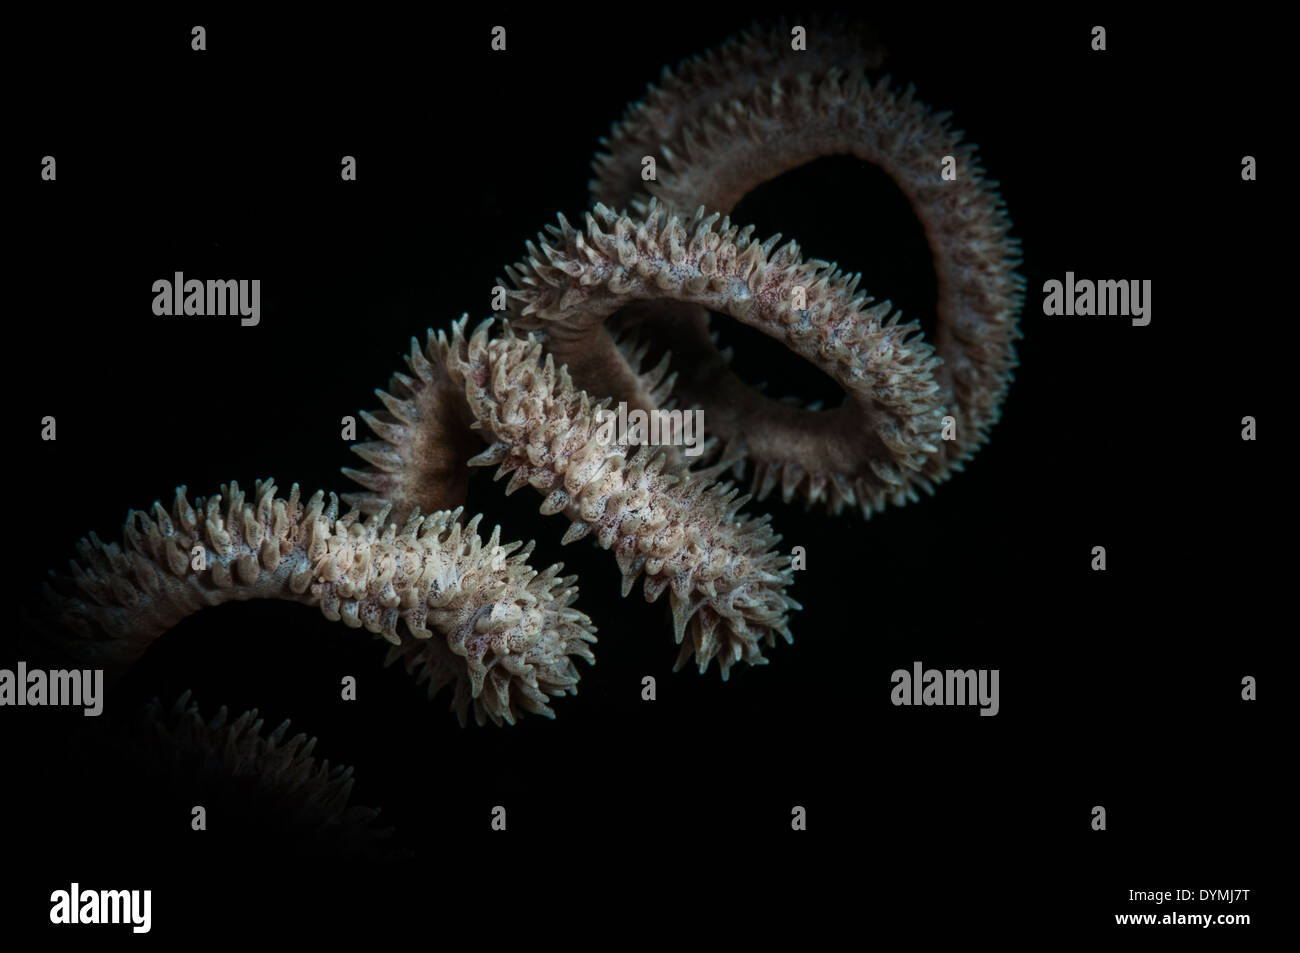 Circles formed by whip coral (Cirripathes sp.) in the Lembeh Straits of North Sulawesi, Indonesia Stock Photo